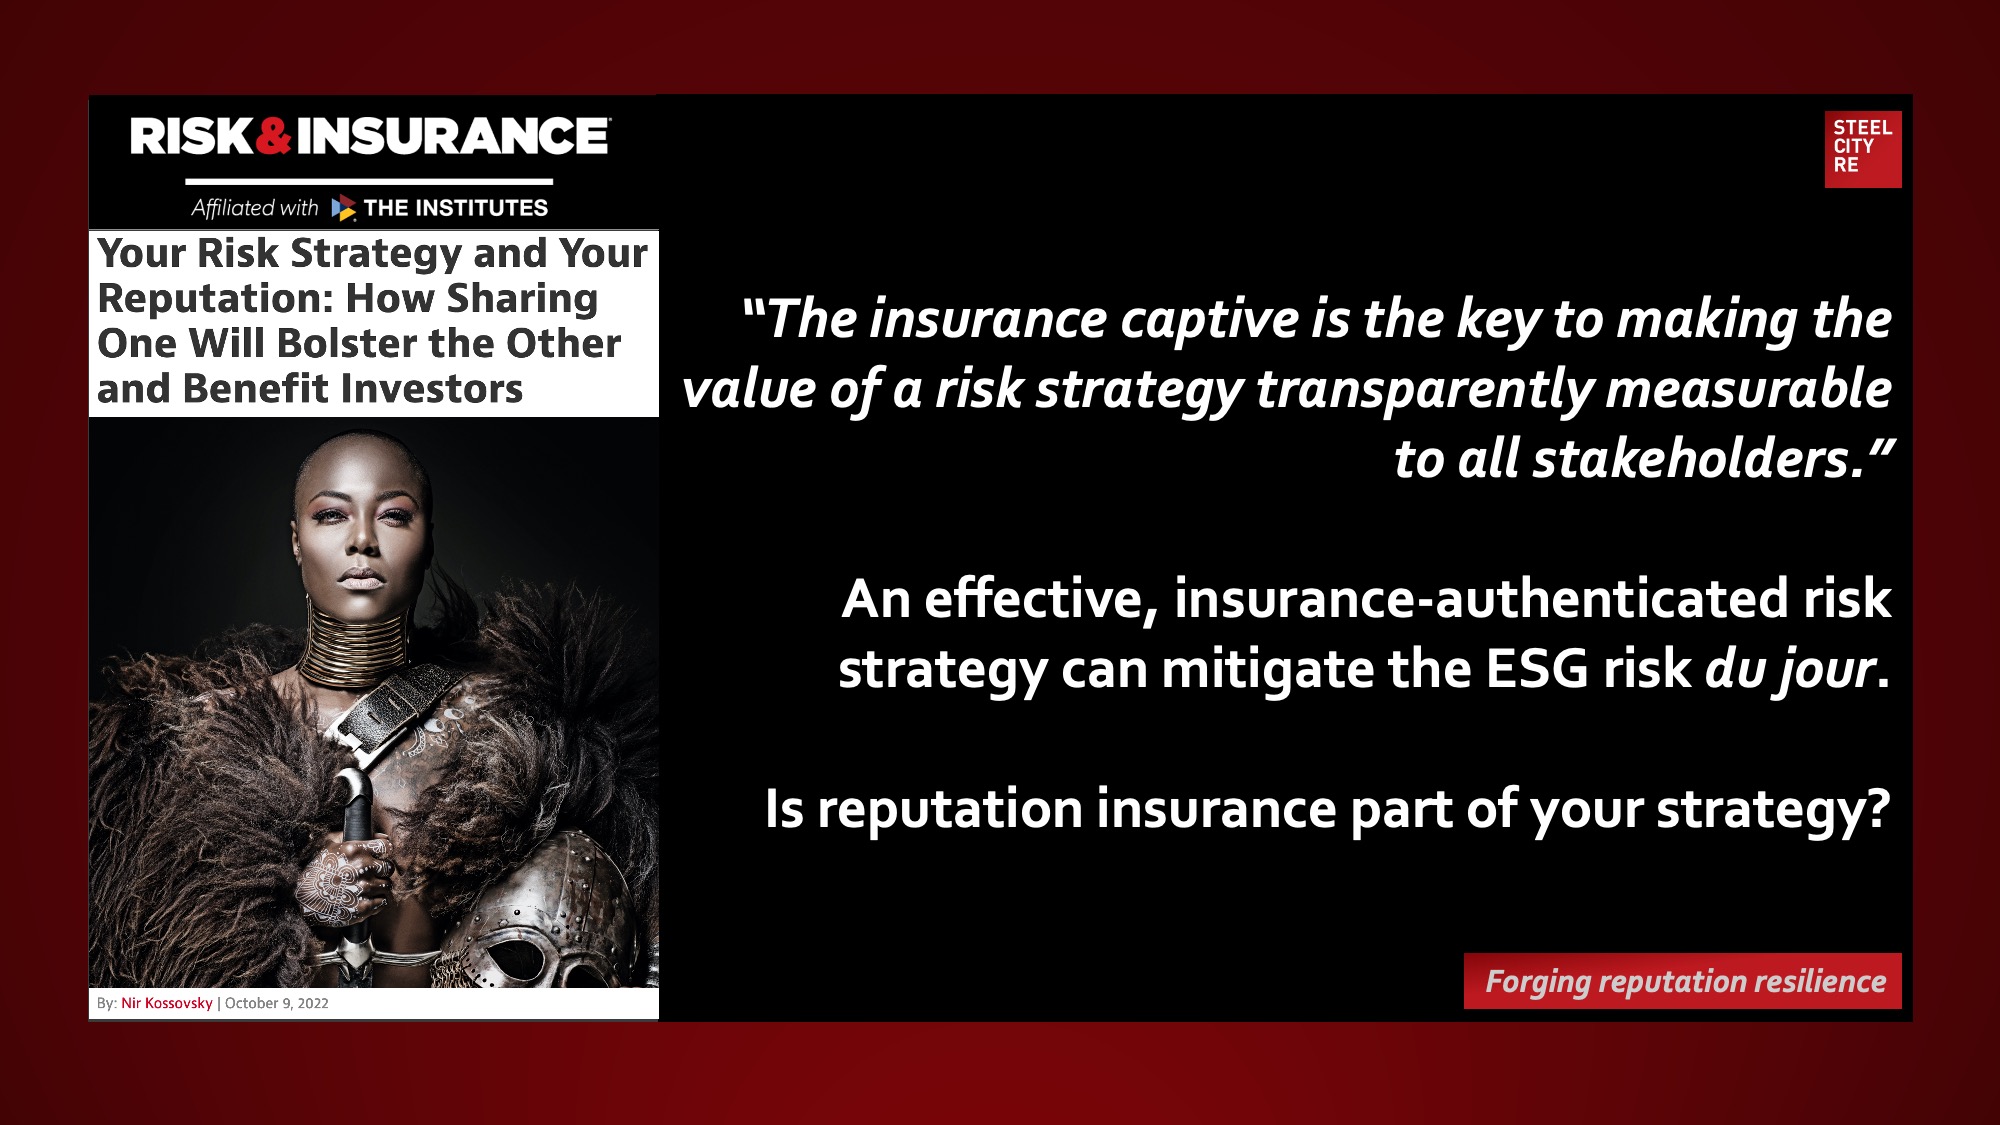 Insurance Captive and Risk Strategy Transparency